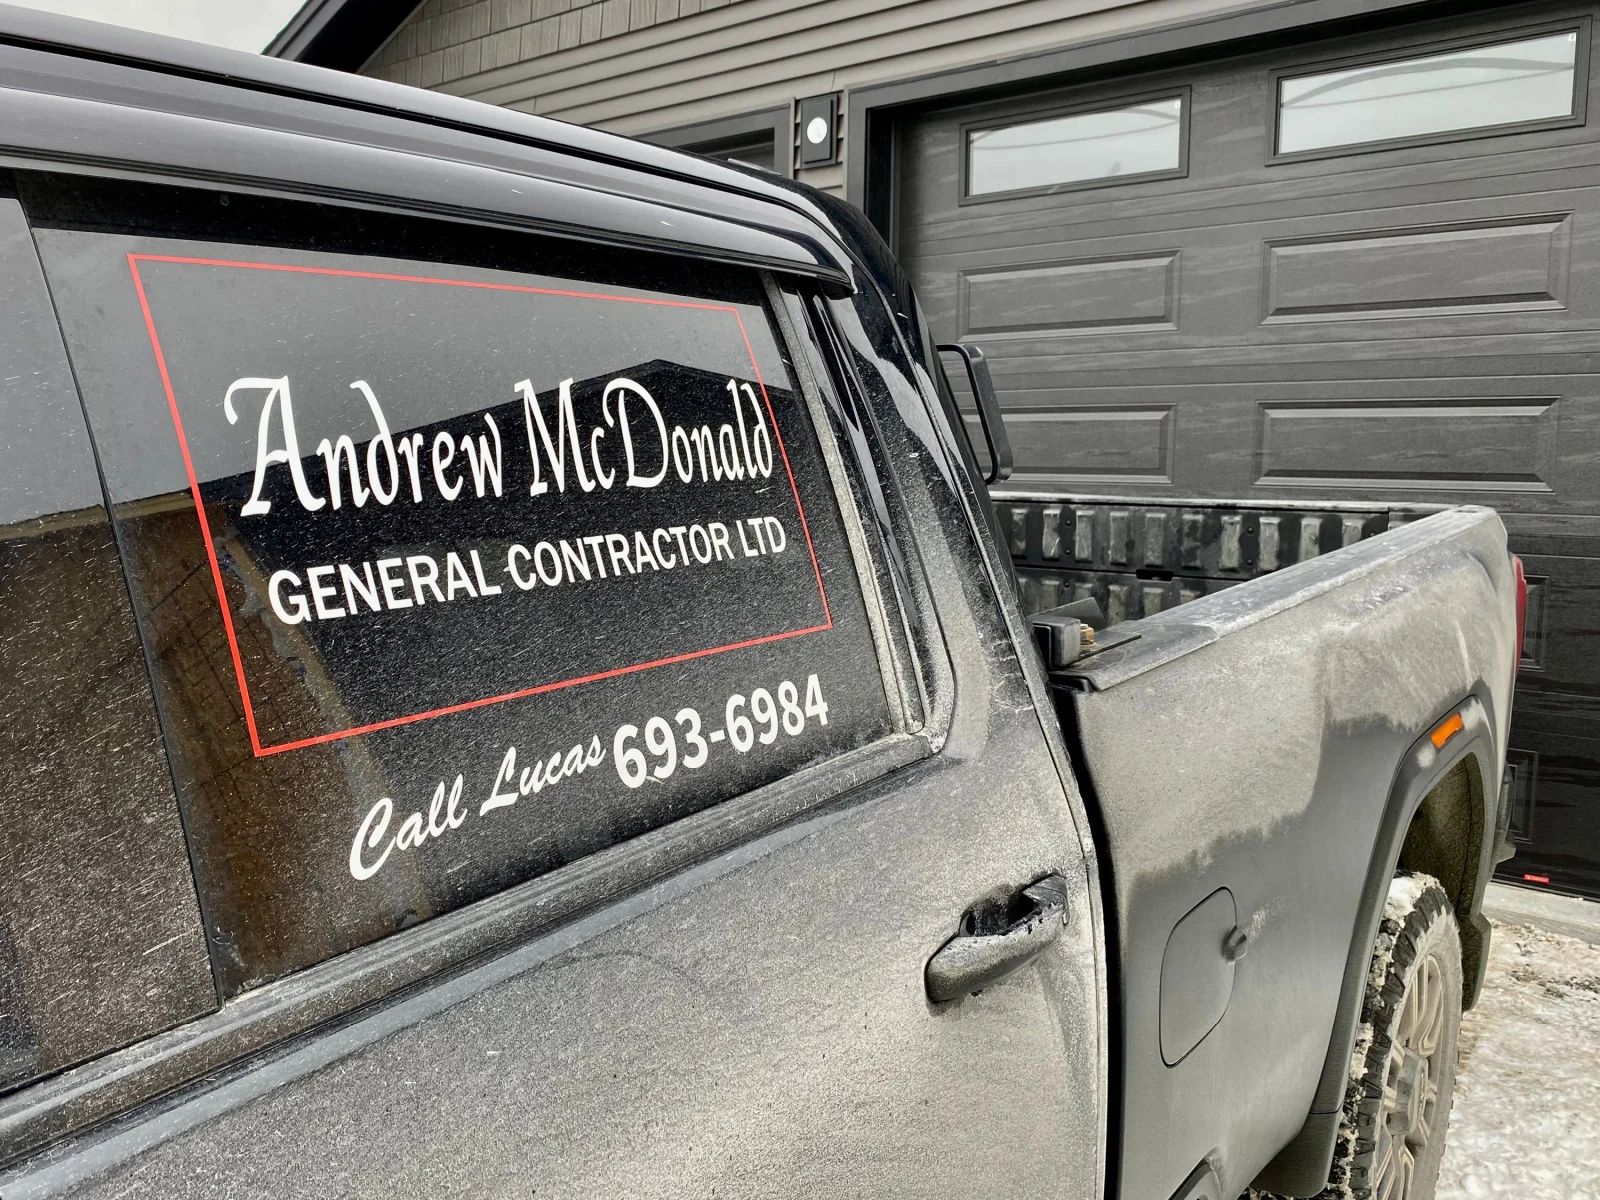 A truck with Andrew McDonald's logo on the window